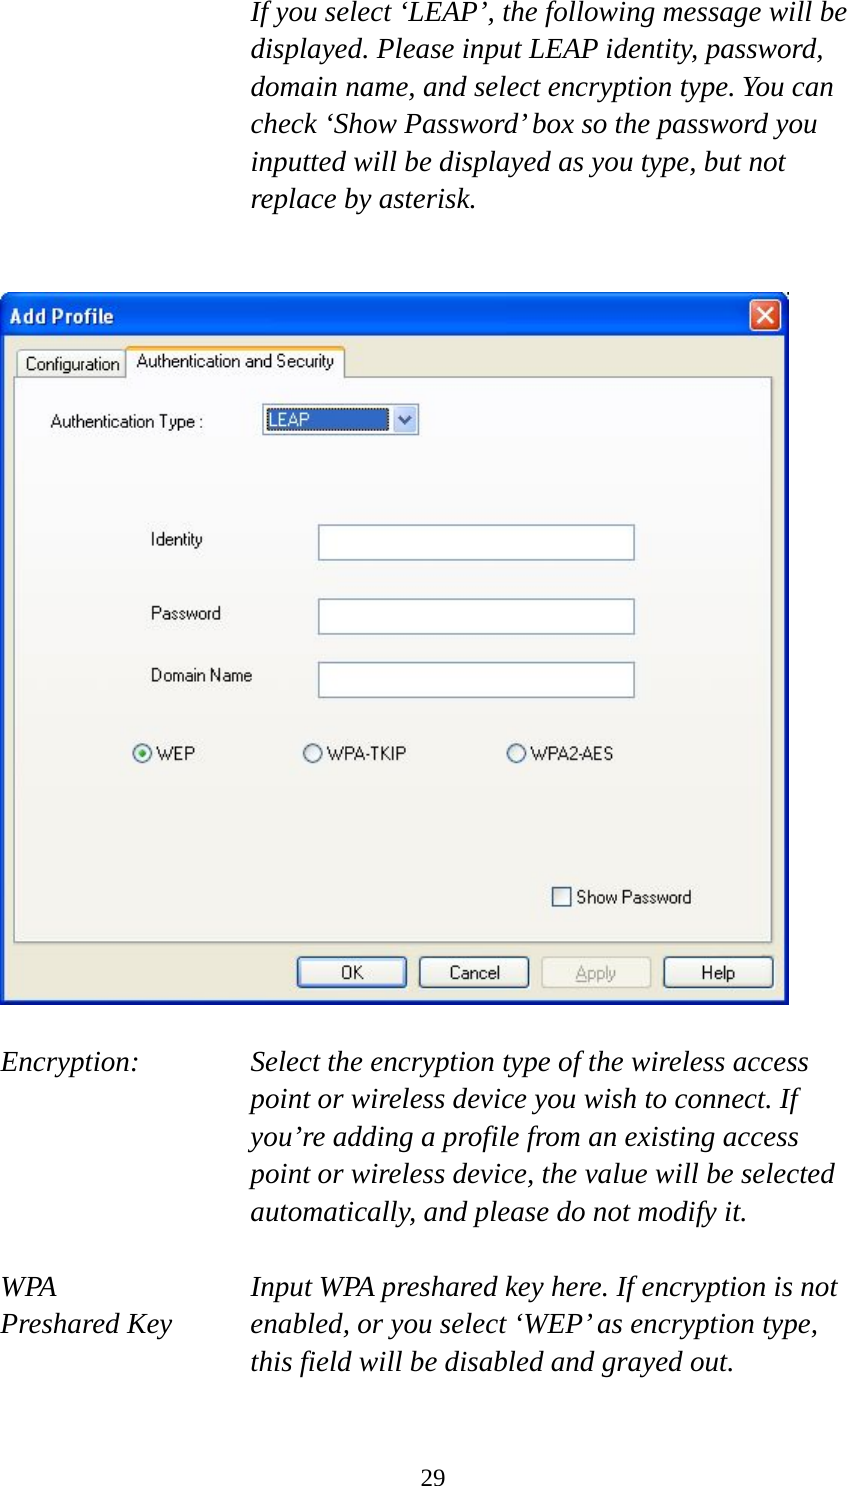  29If you select ‘LEAP’, the following message will be displayed. Please input LEAP identity, password, domain name, and select encryption type. You can check ‘Show Password’ box so the password you inputted will be displayed as you type, but not replace by asterisk.     Encryption: Select the encryption type of the wireless access point or wireless device you wish to connect. If you’re adding a profile from an existing access point or wireless device, the value will be selected automatically, and please do not modify it.  WPA    Input WPA preshared key here. If encryption is not Preshared Key  enabled, or you select ‘WEP’ as encryption type, this field will be disabled and grayed out.  